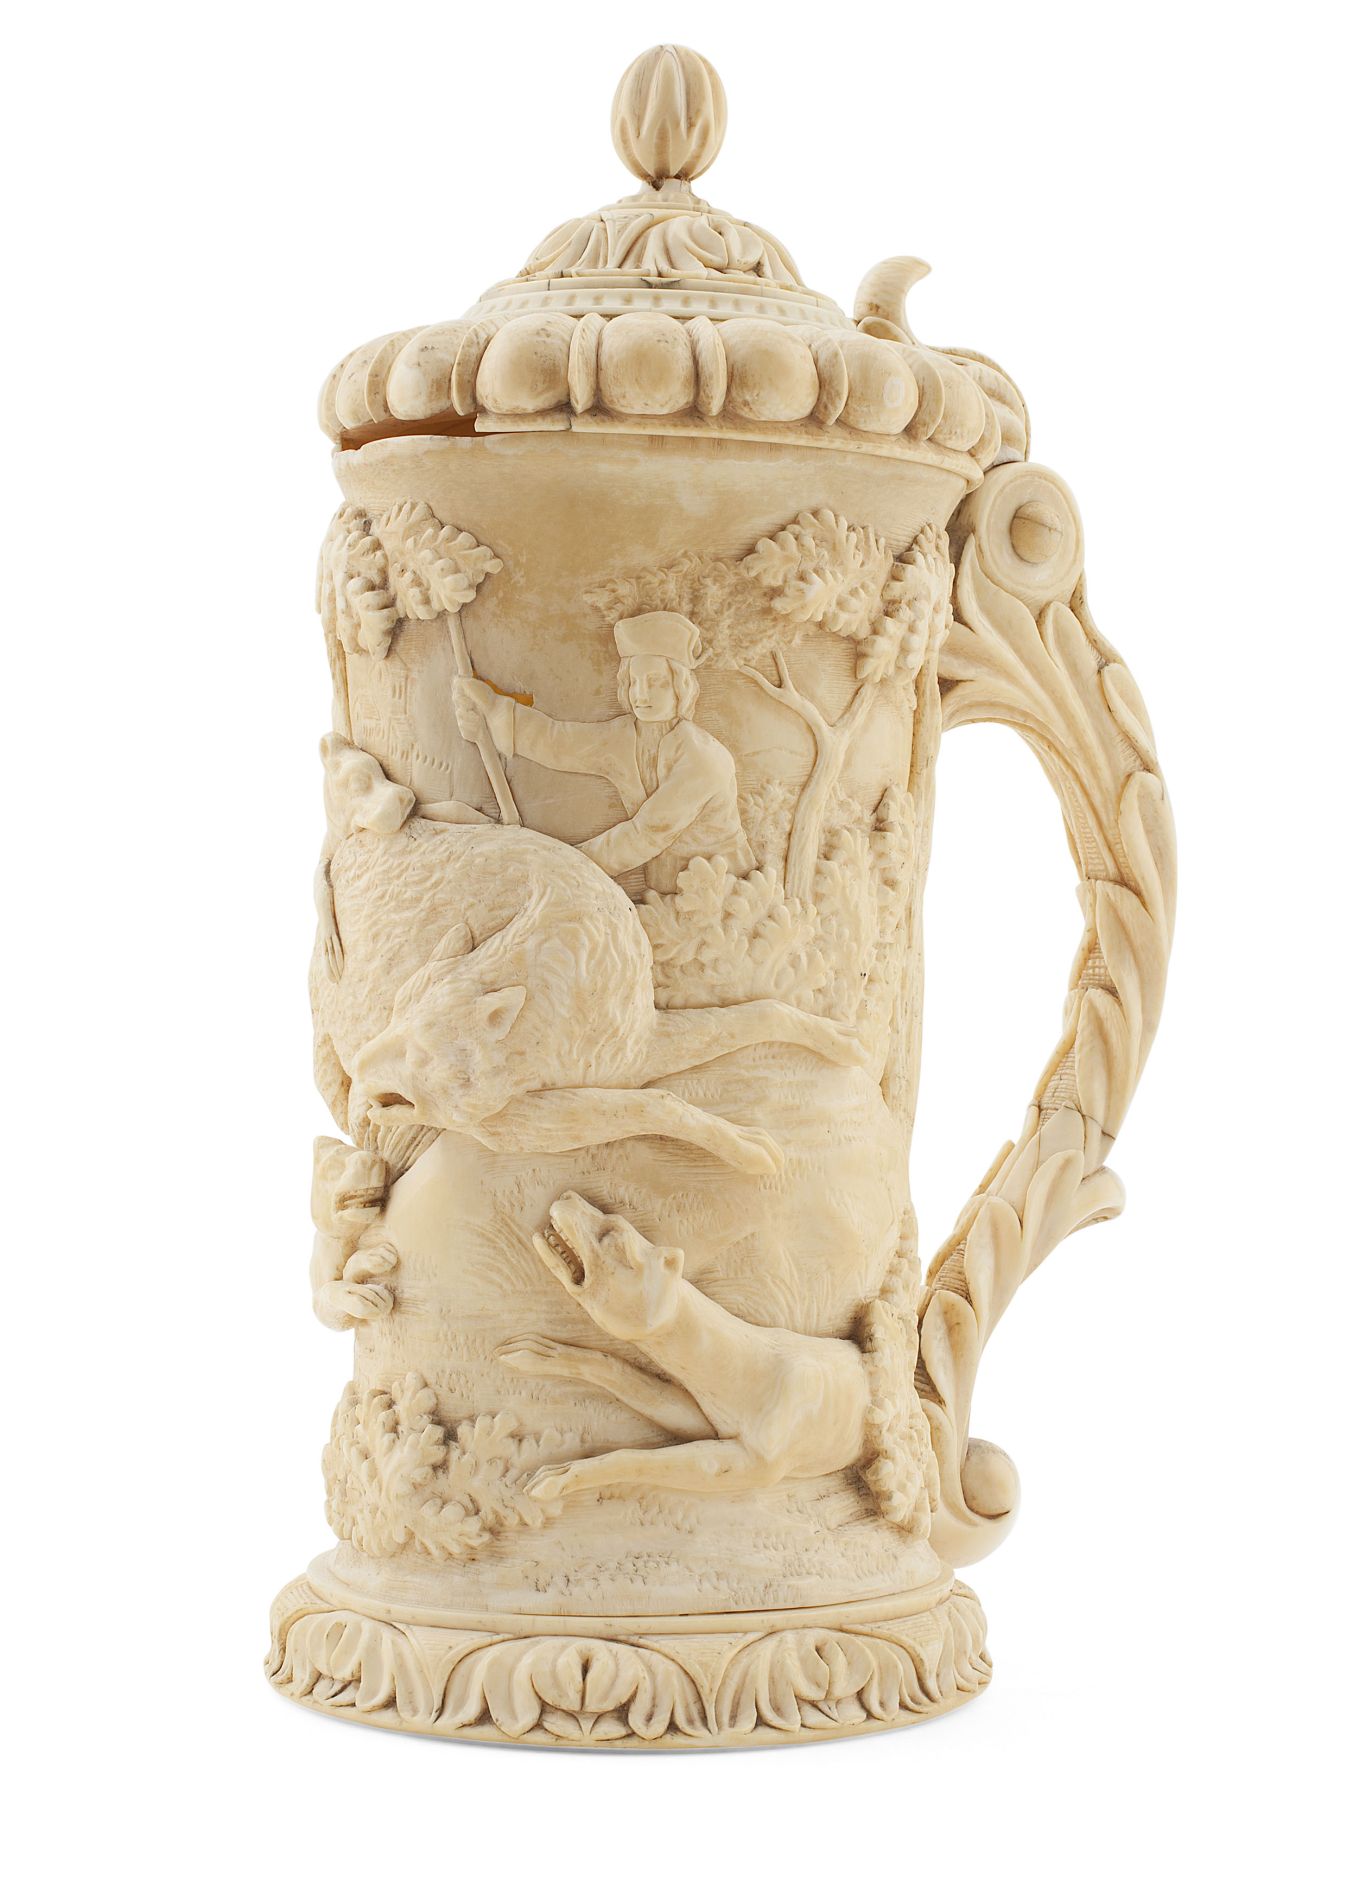 GERMAN CARVED IVORY TANKARD 19TH CENTURY the domed hinged cover carved with acanthus with a bud